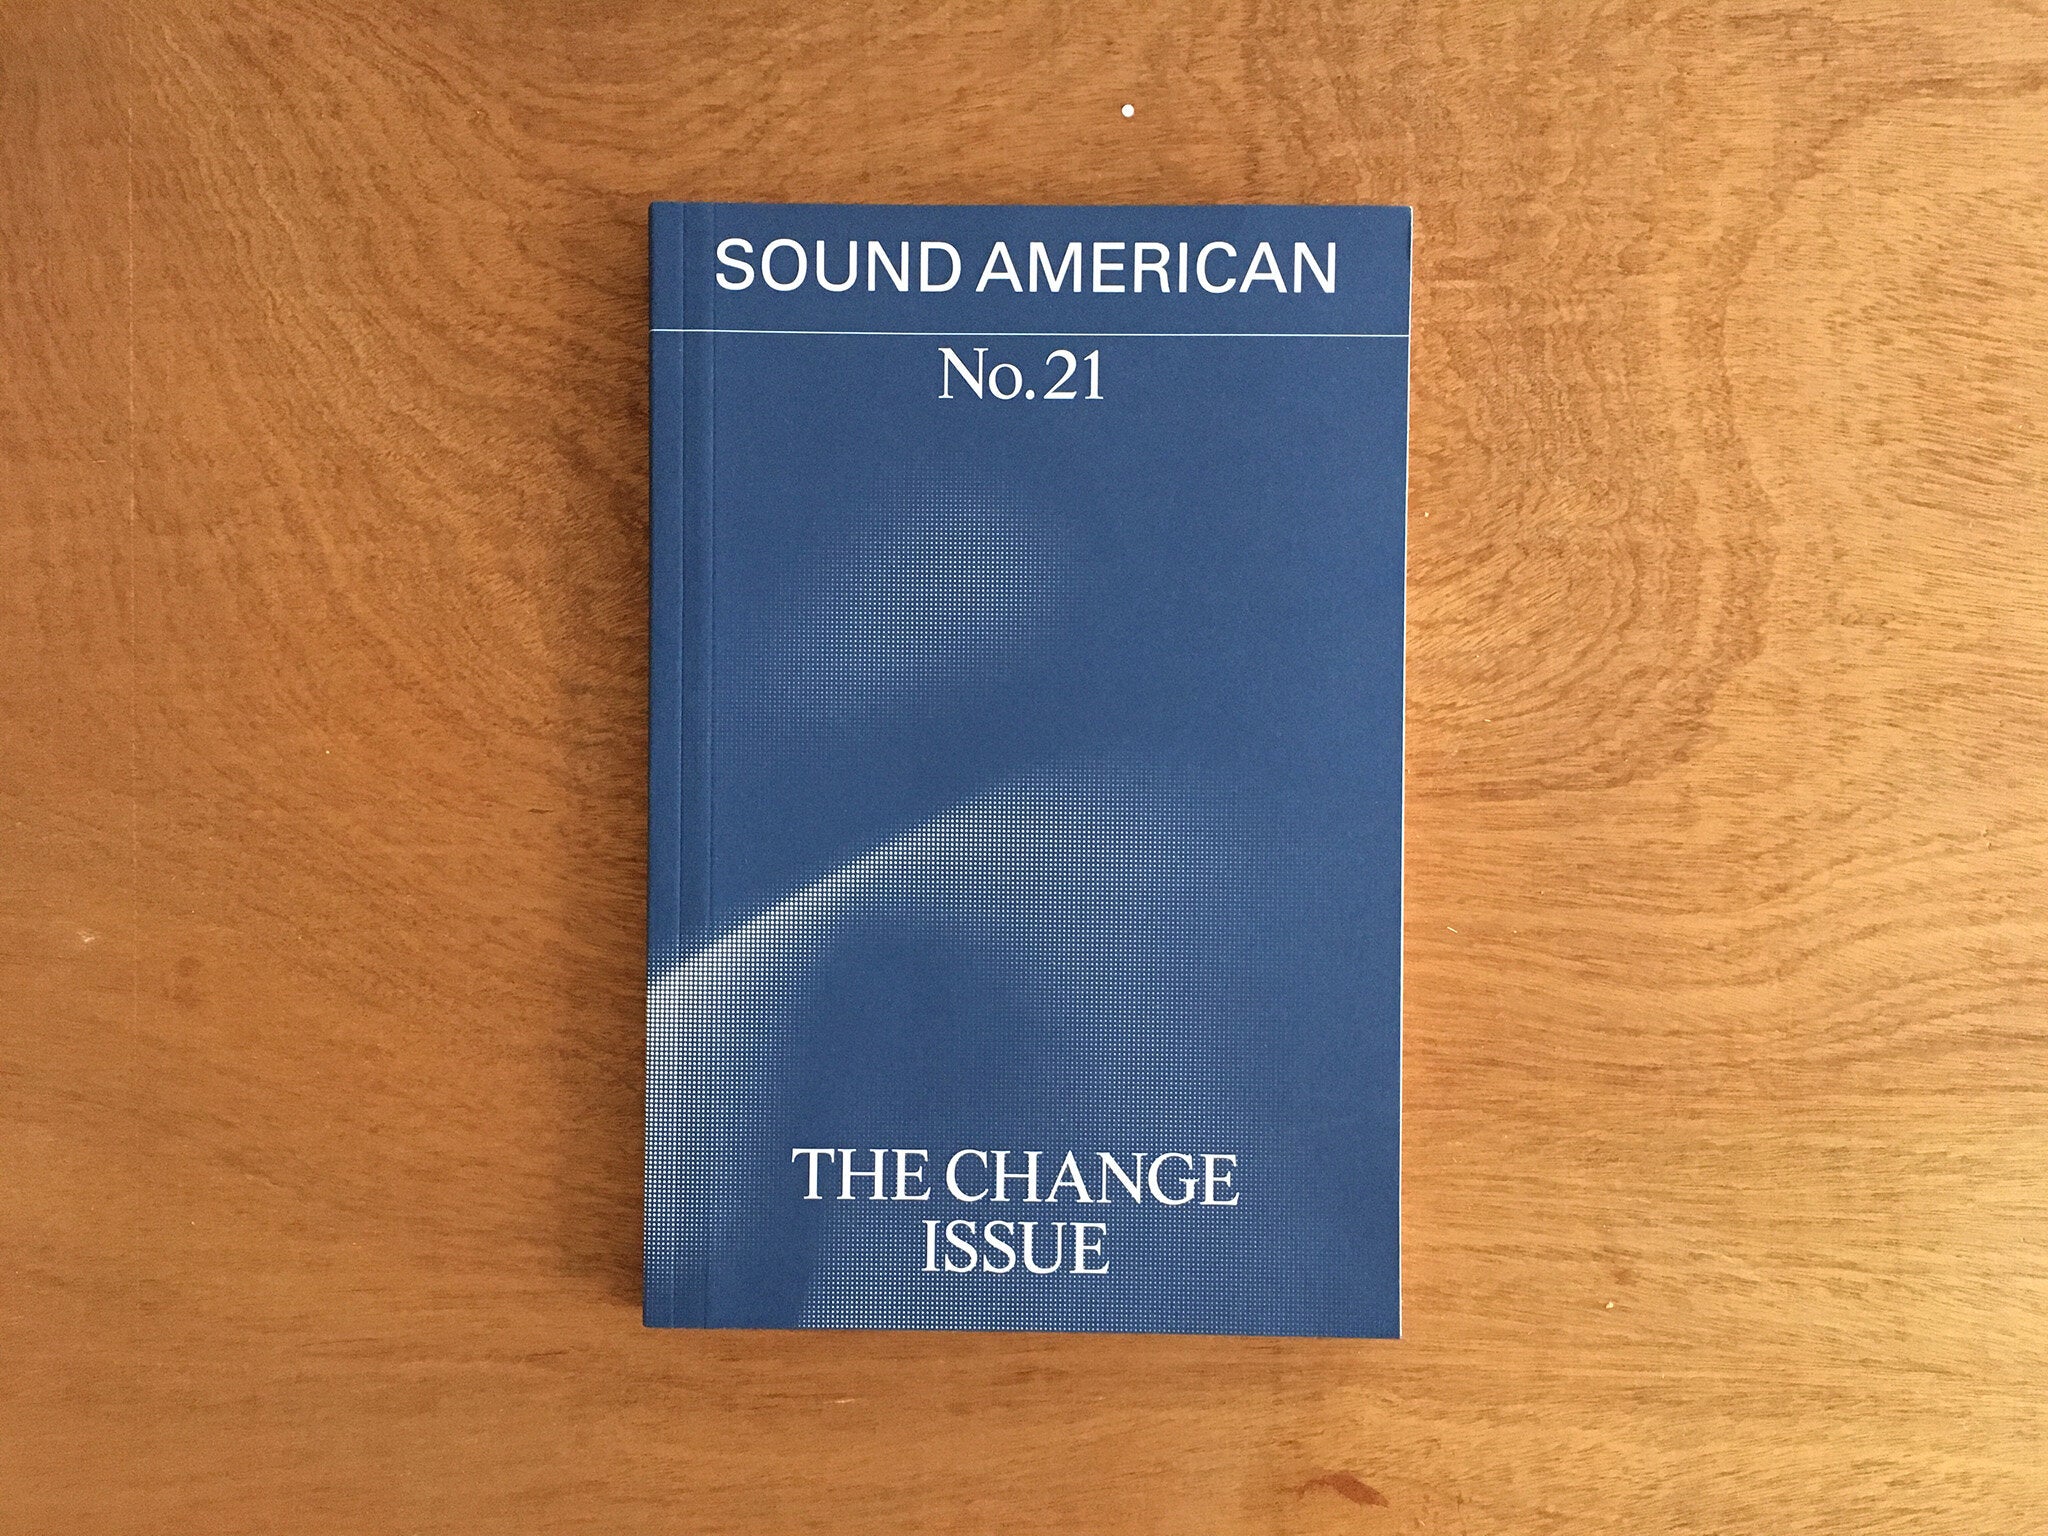 SOUND AMERICAN #21 — THE CHANGE ISSUE